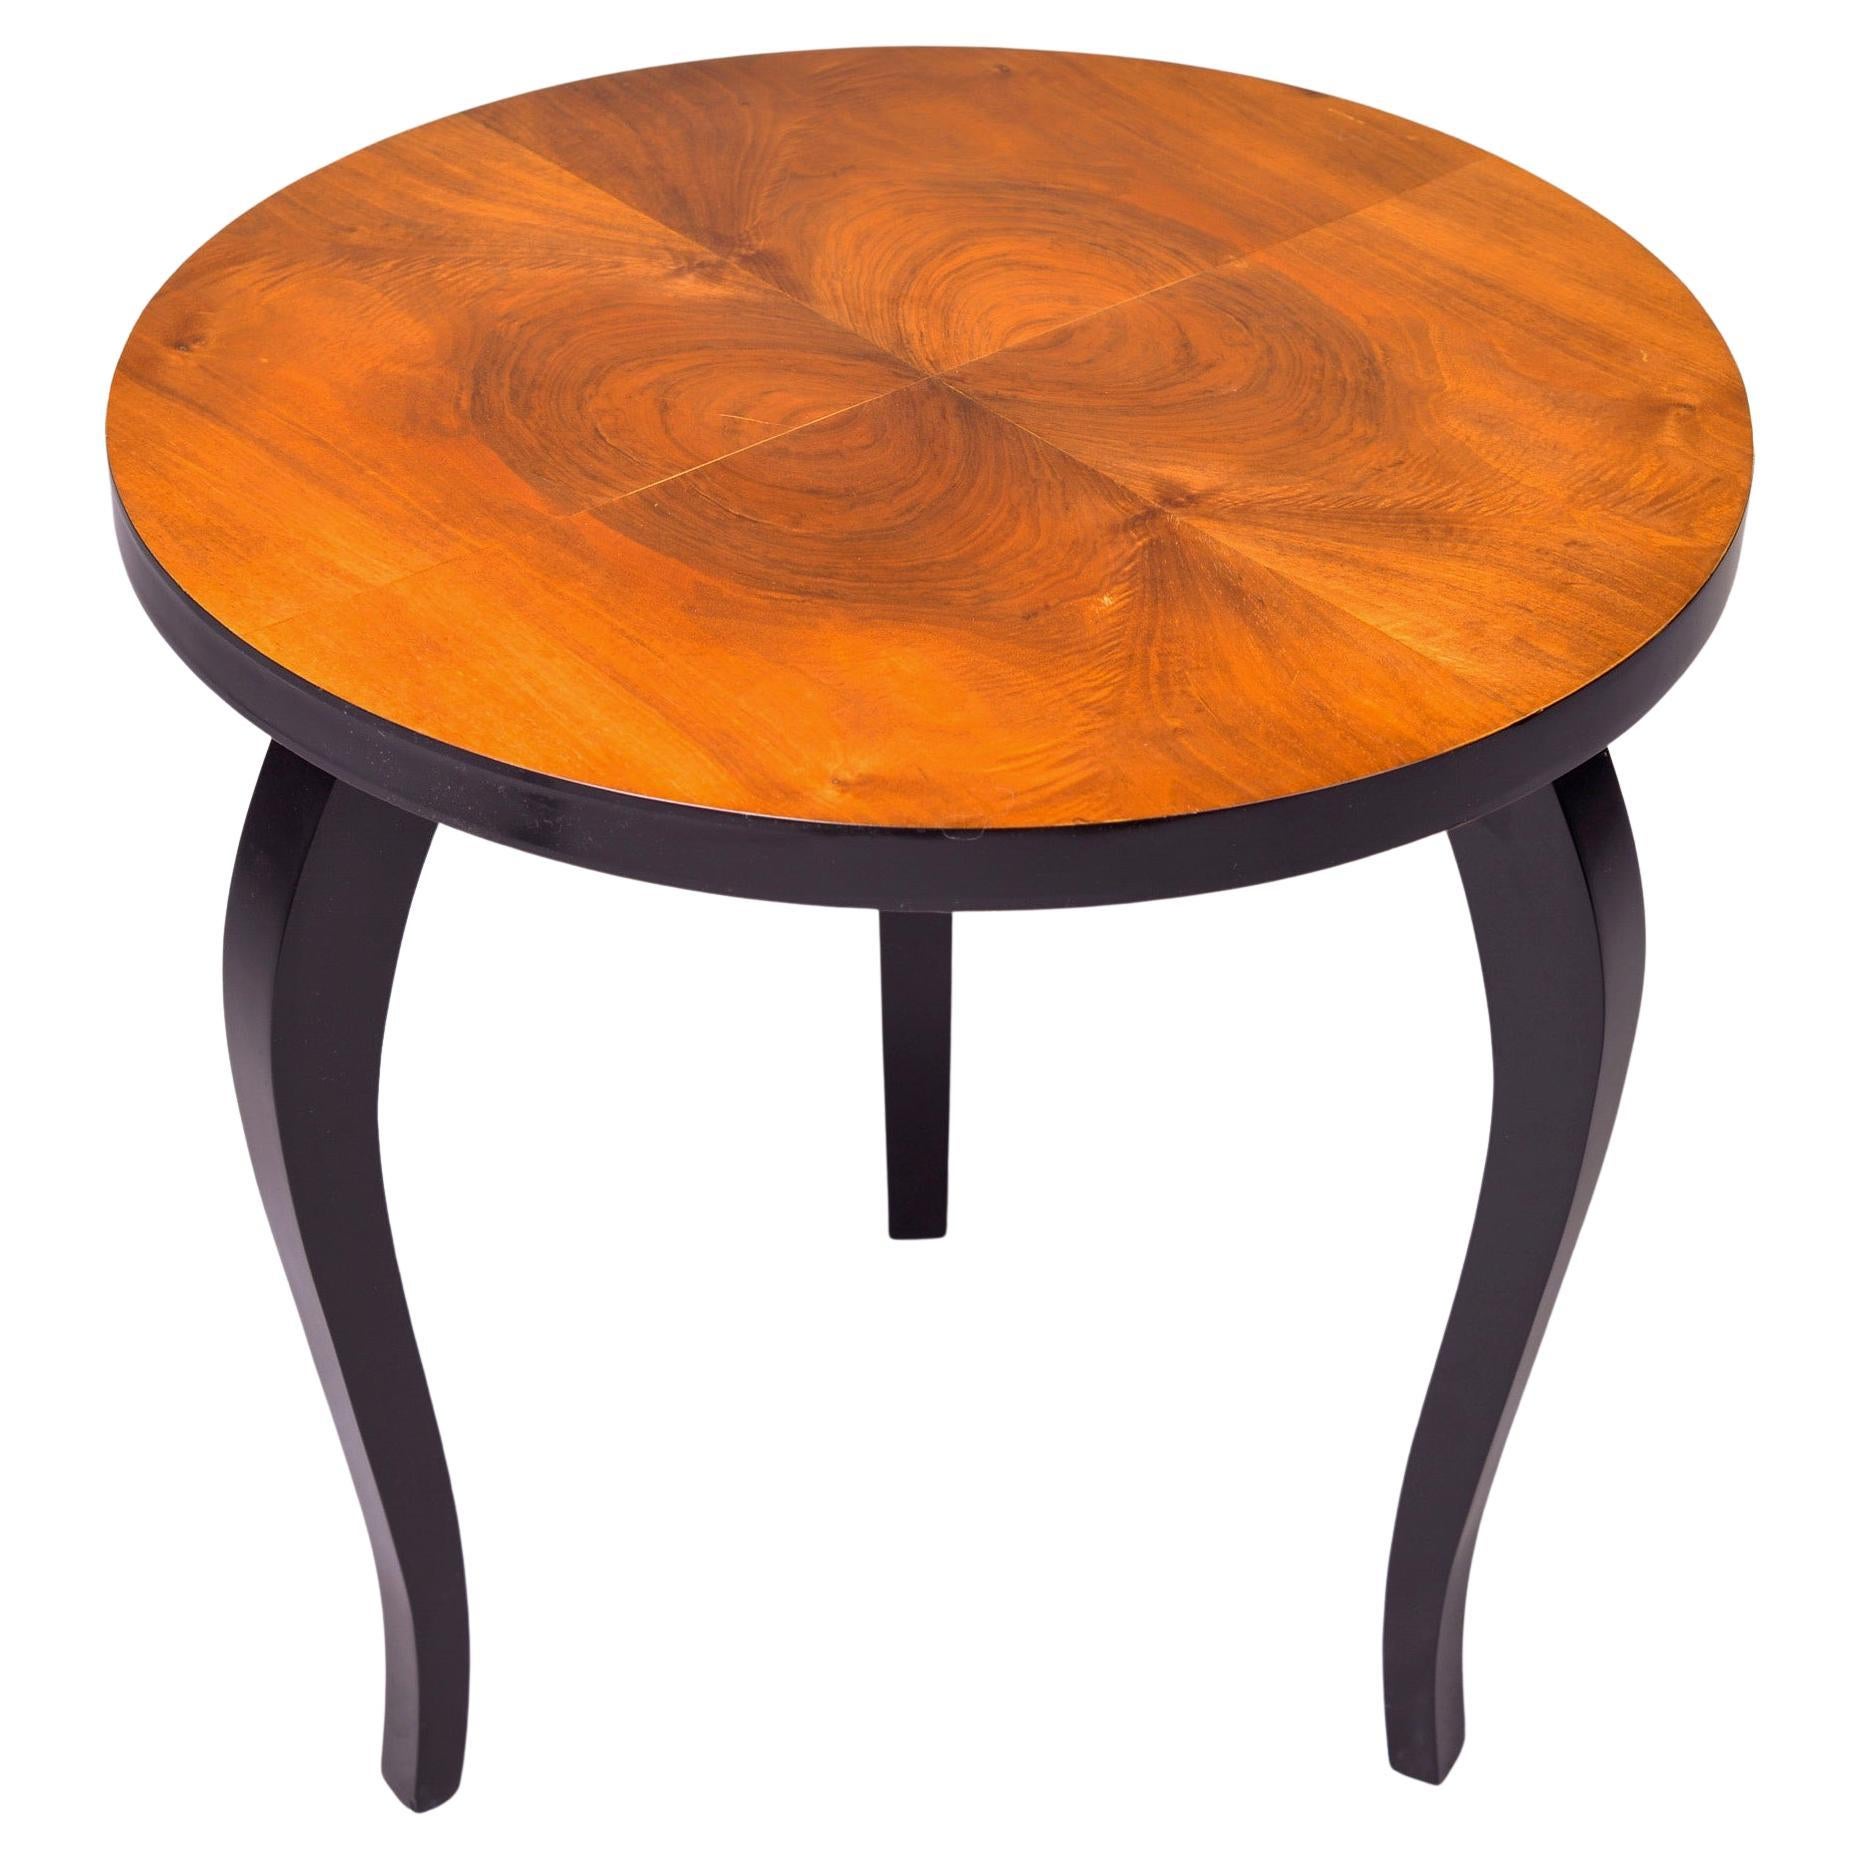 French Art Deco Round Burl Wood Side Table with Black Legs